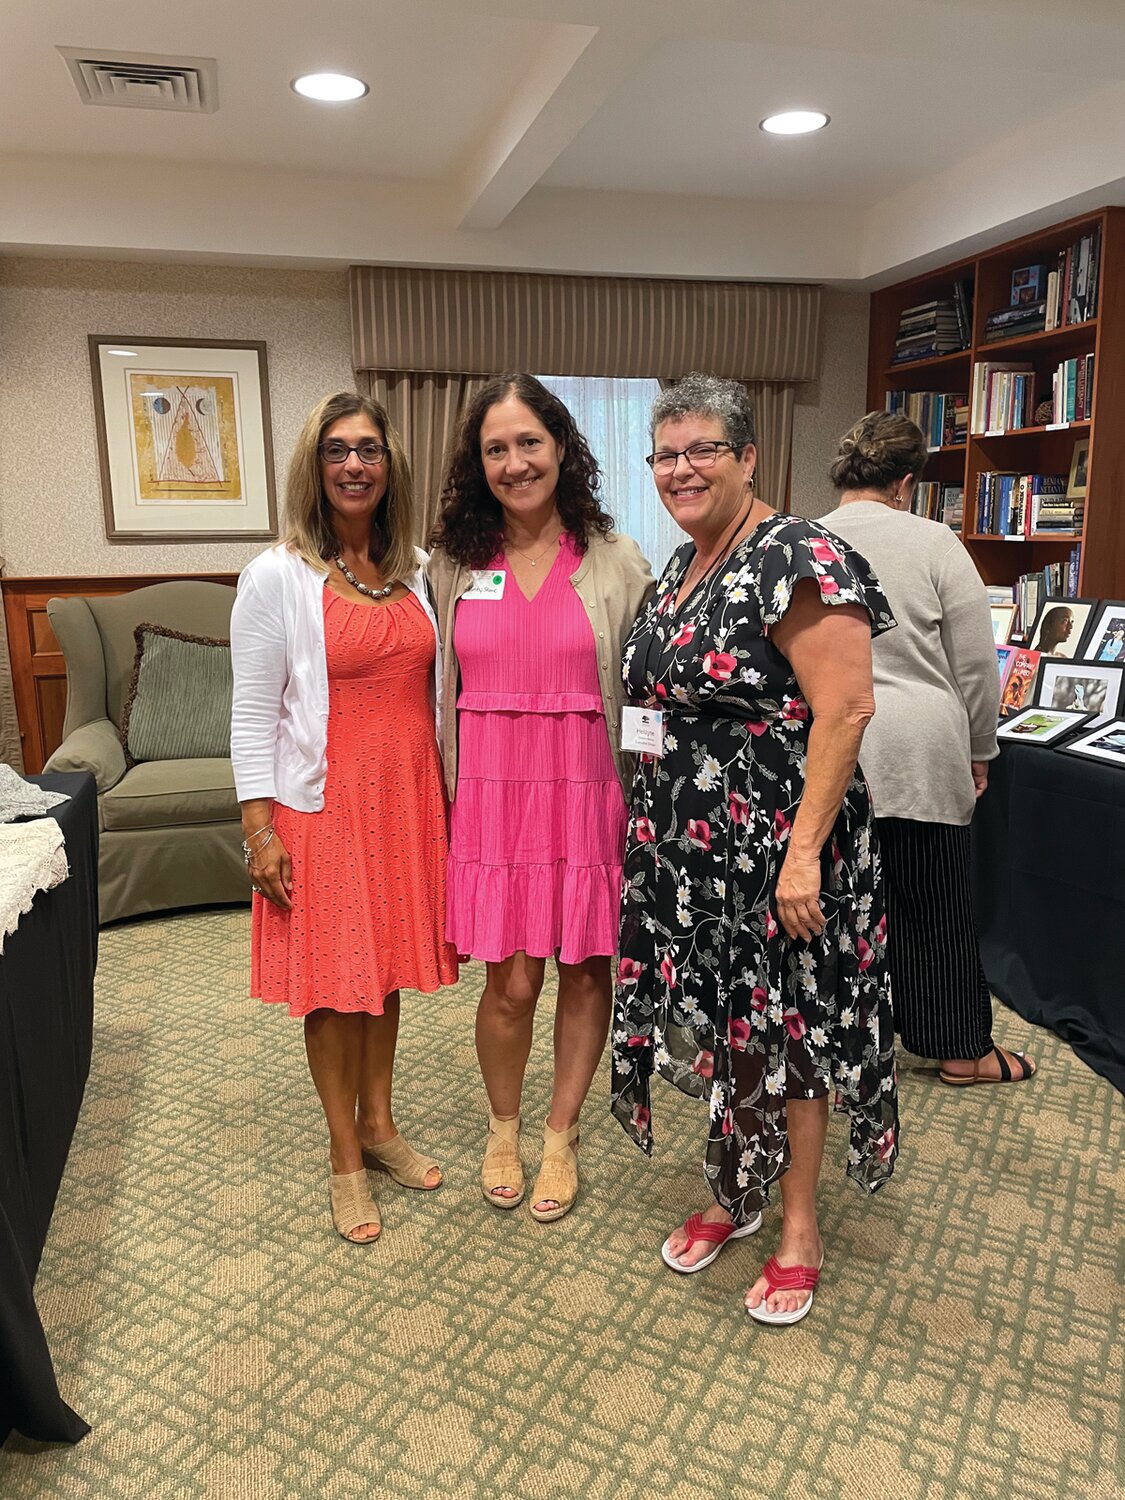 LADIES WHO RULE: Pam Morris, Mindy Stone and Halayne Goldstein-Rramirez are all smiles at the successful 20th anniversary party.